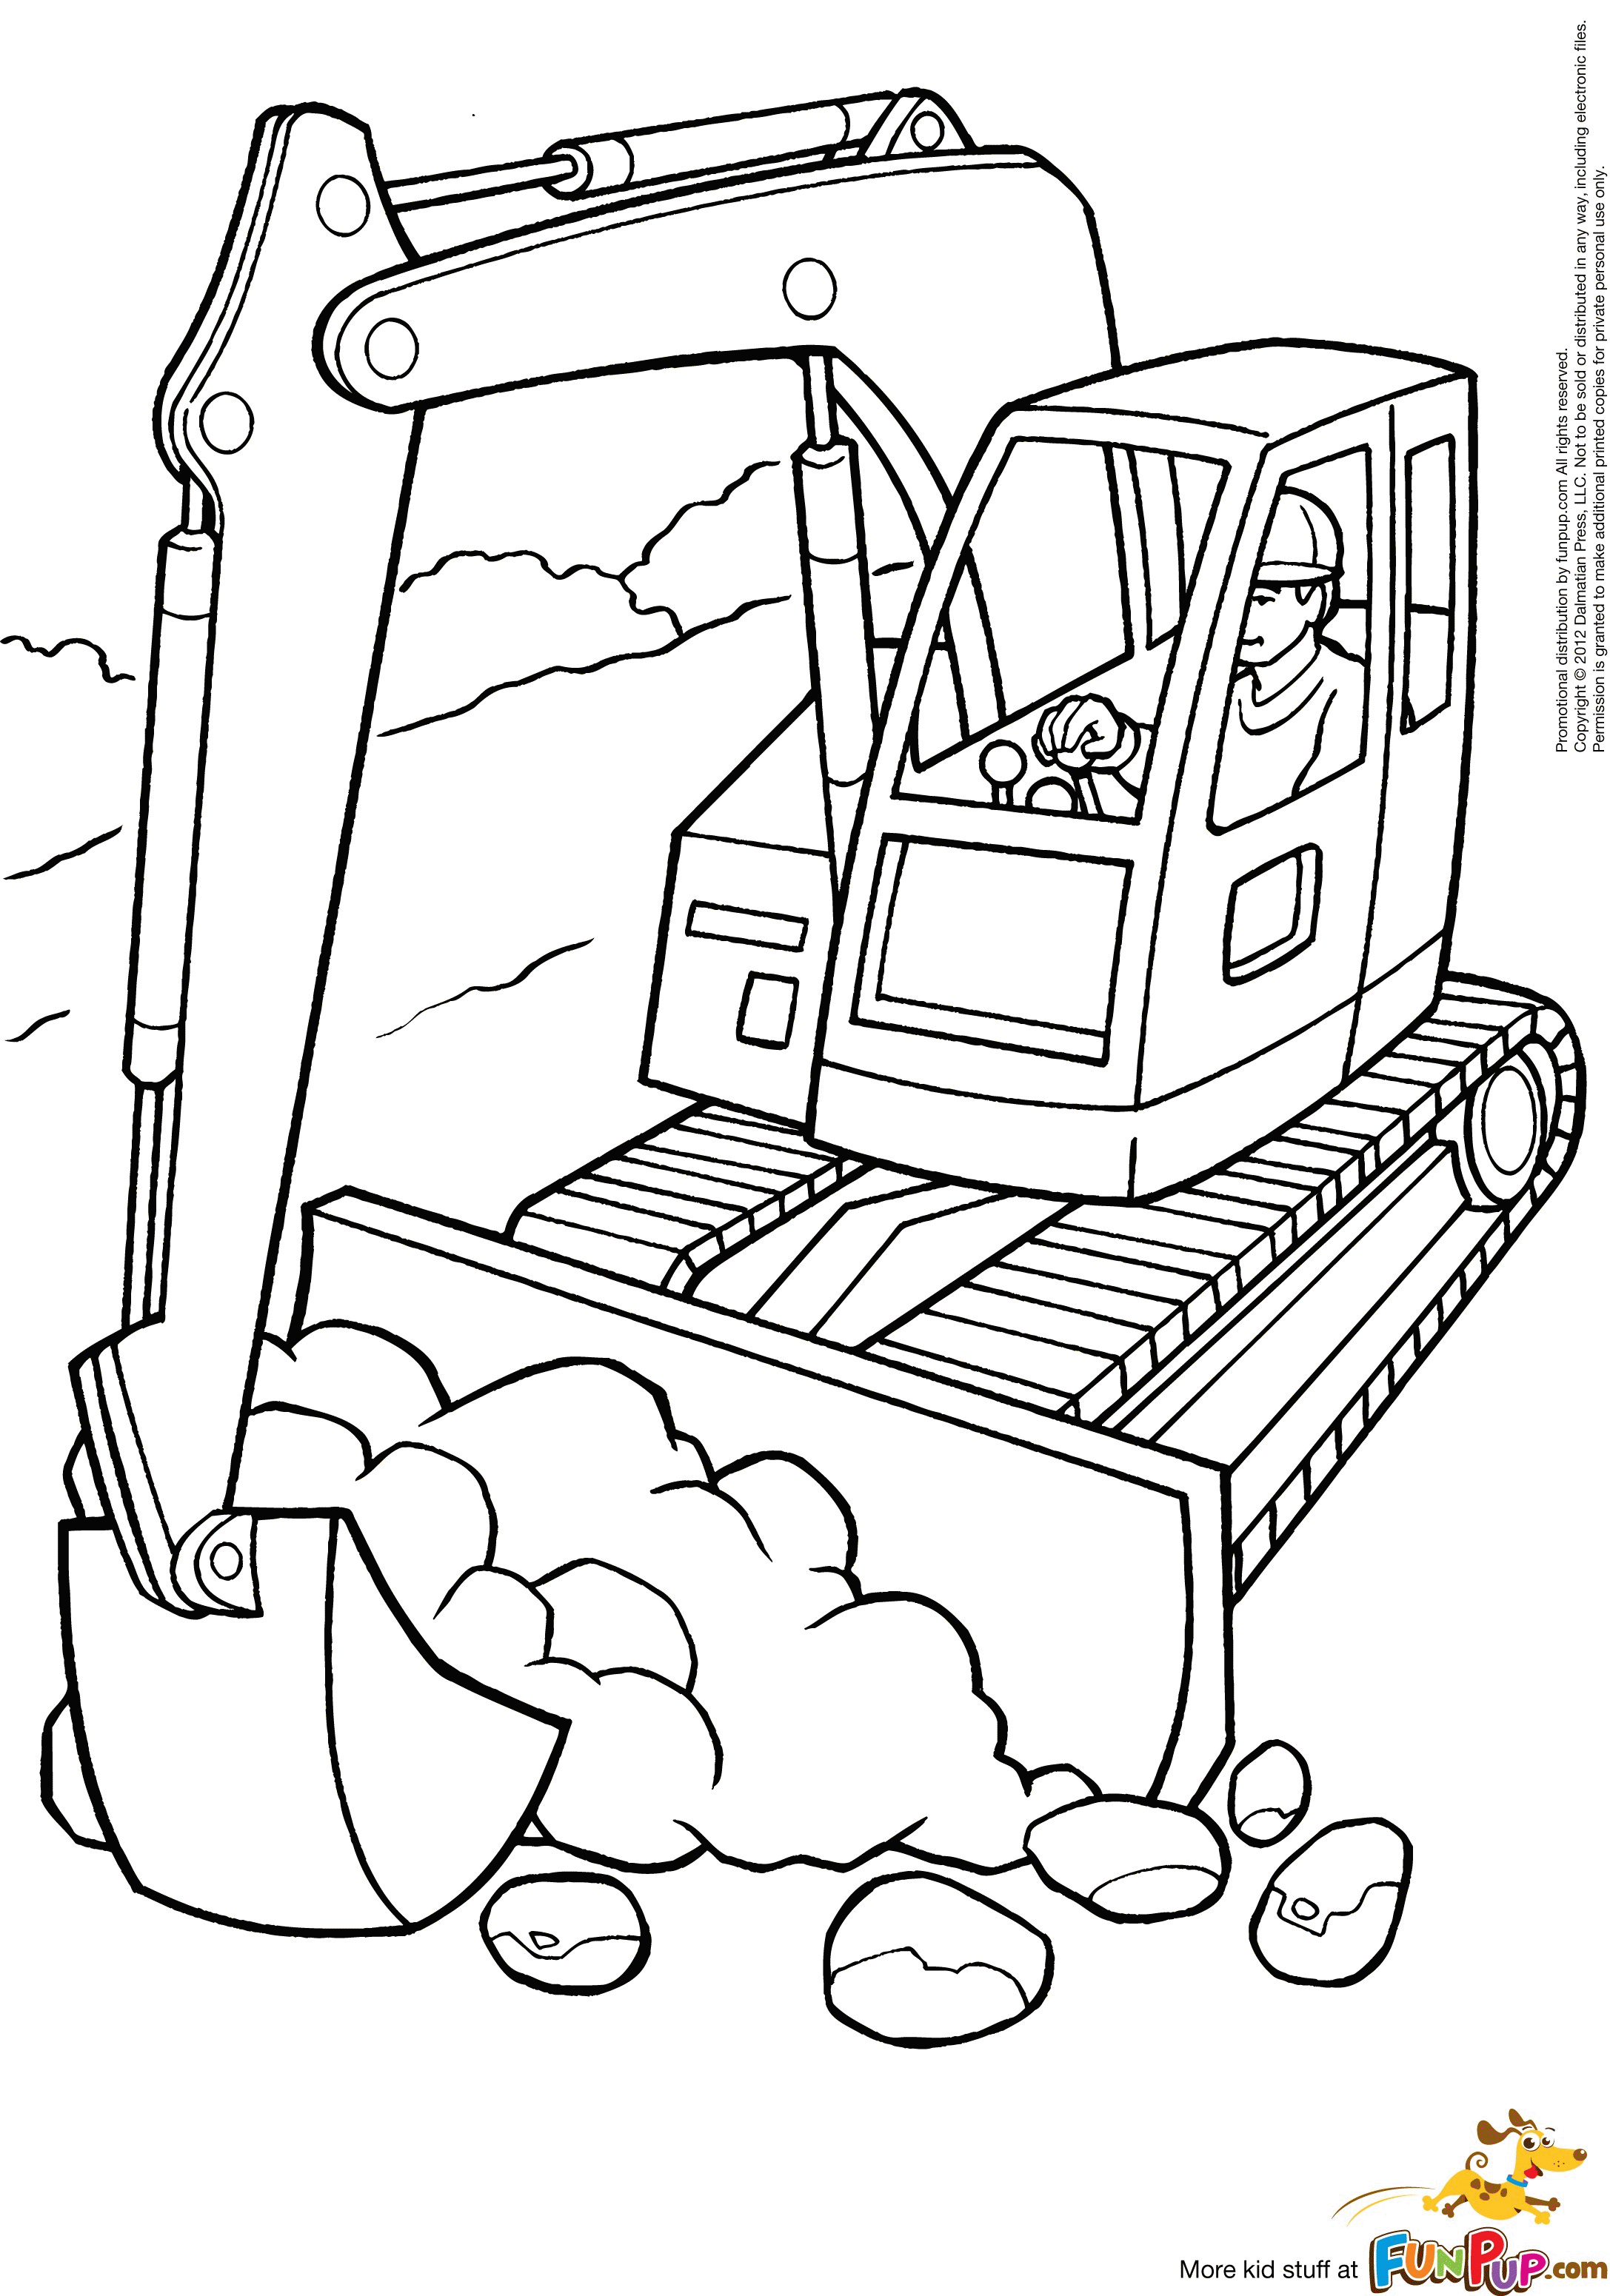 Construction Equipment Coloring Pages: equipment coloring pages ...